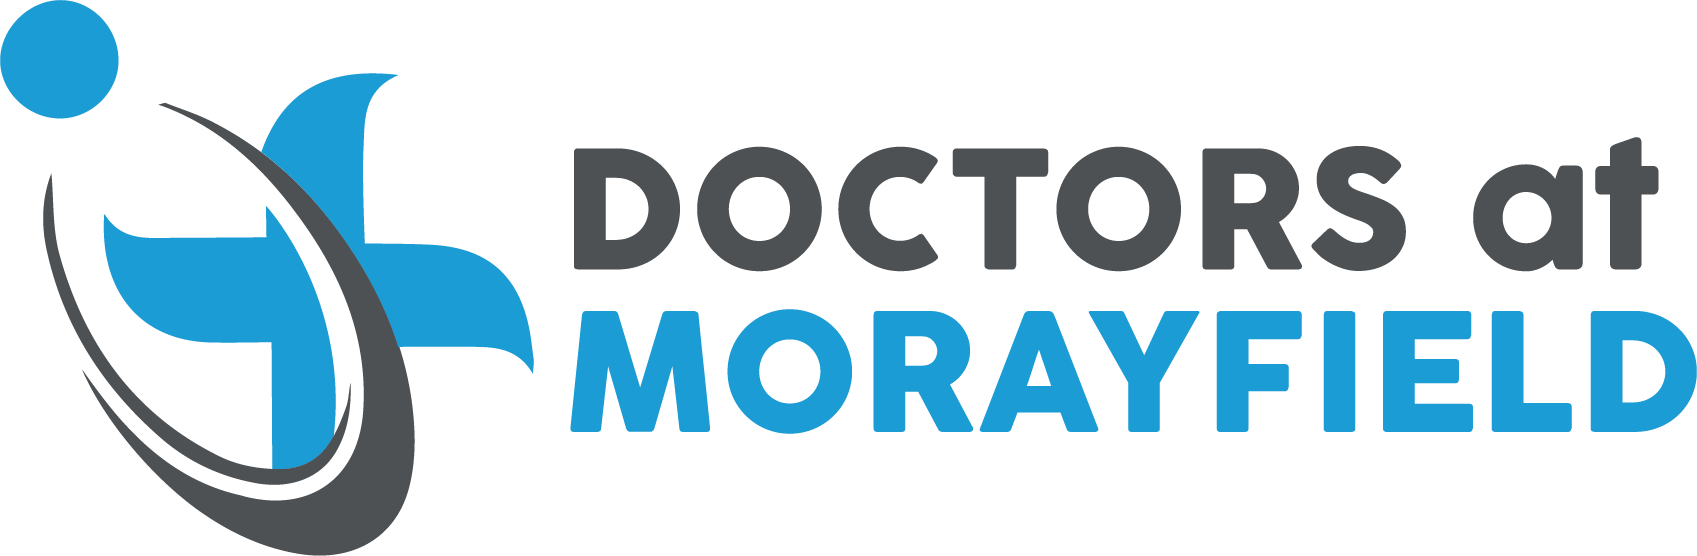 Doctors at Morayfield